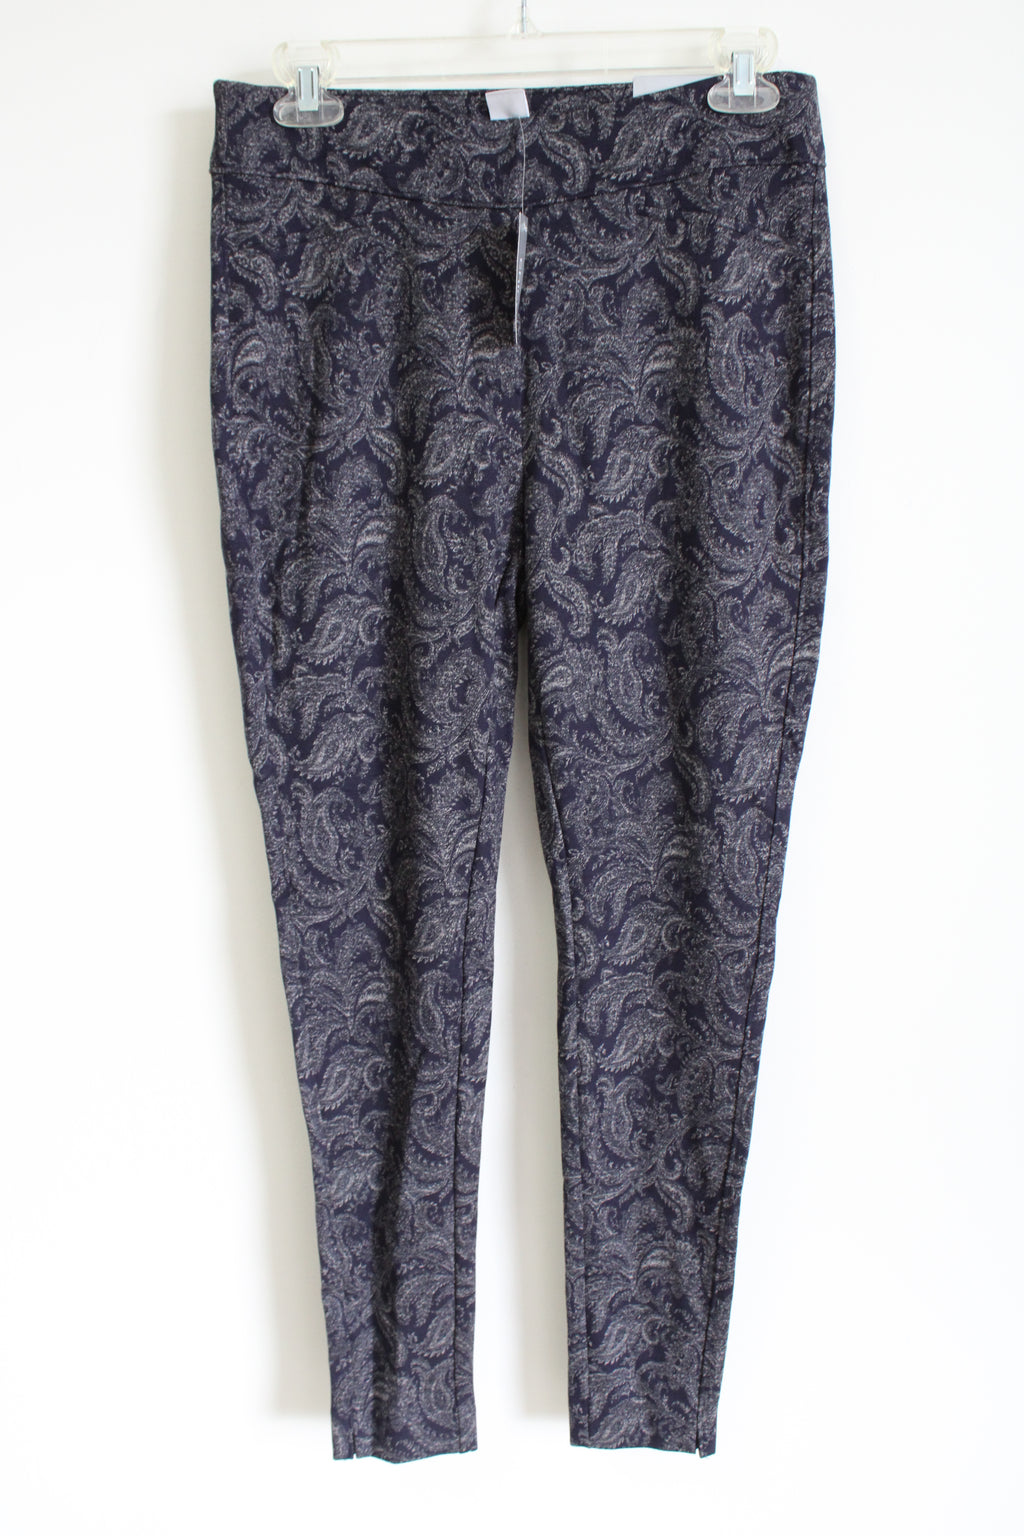 NEW Chico's Blue Paisley Ankle Legging | 0 (4)